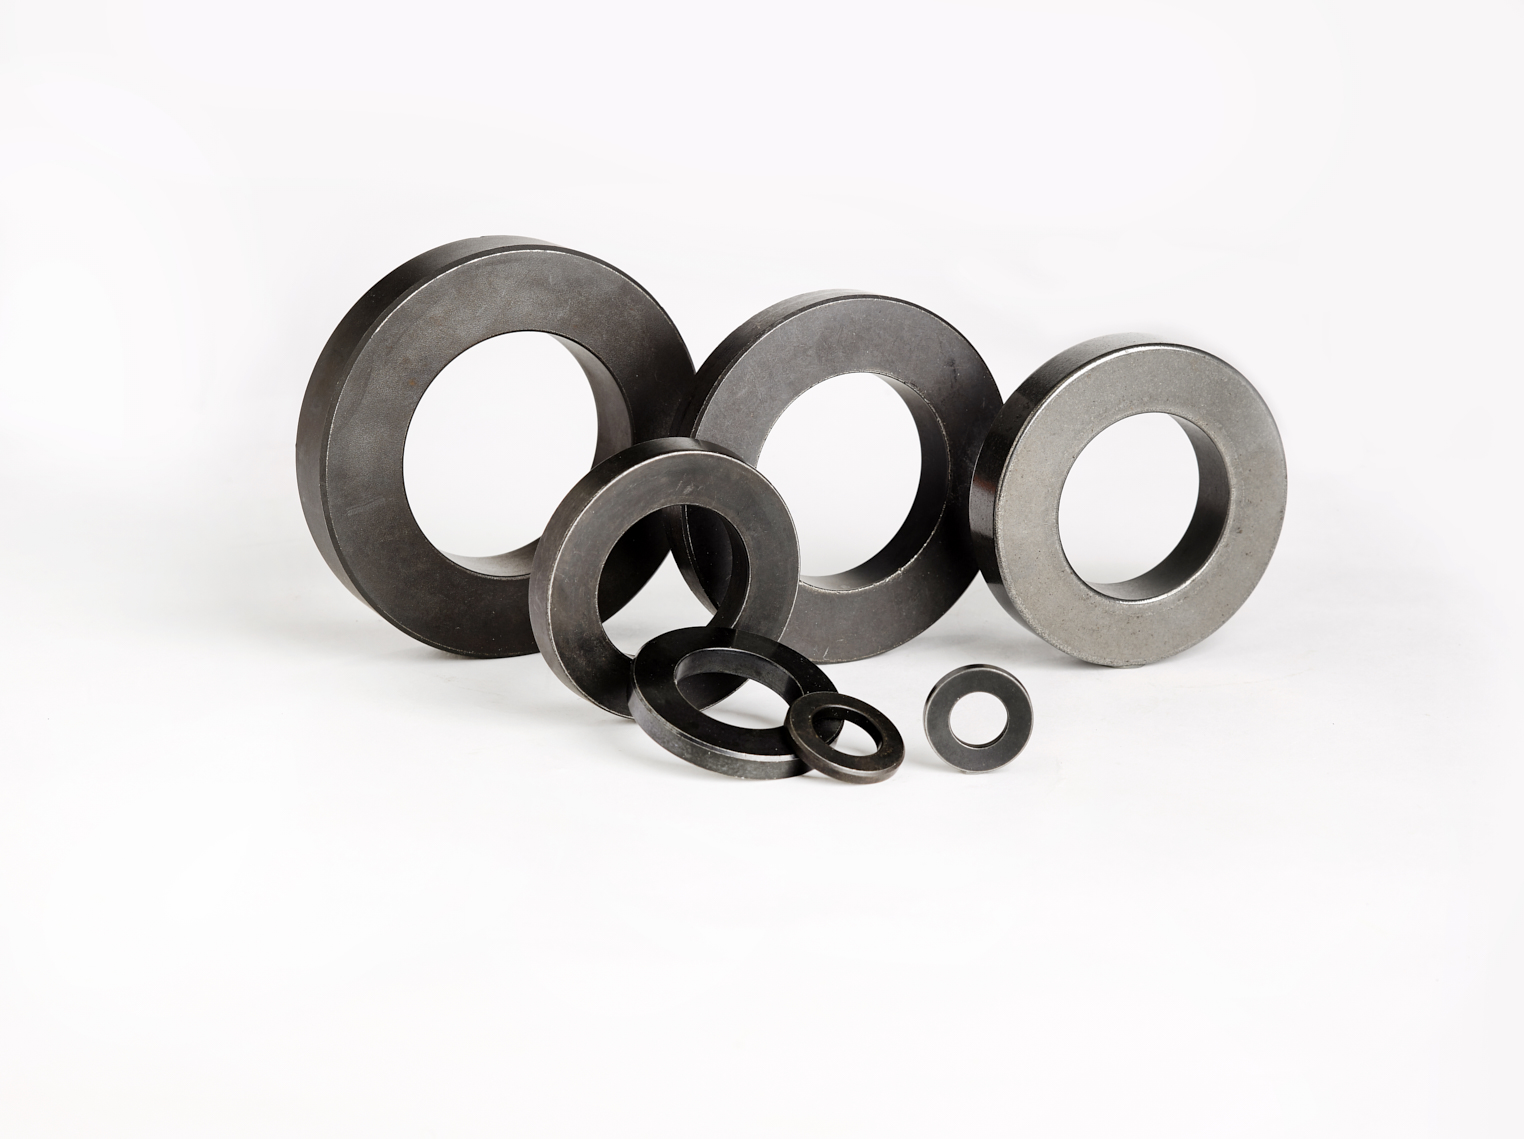 A set of 7 different sized Flange Washers